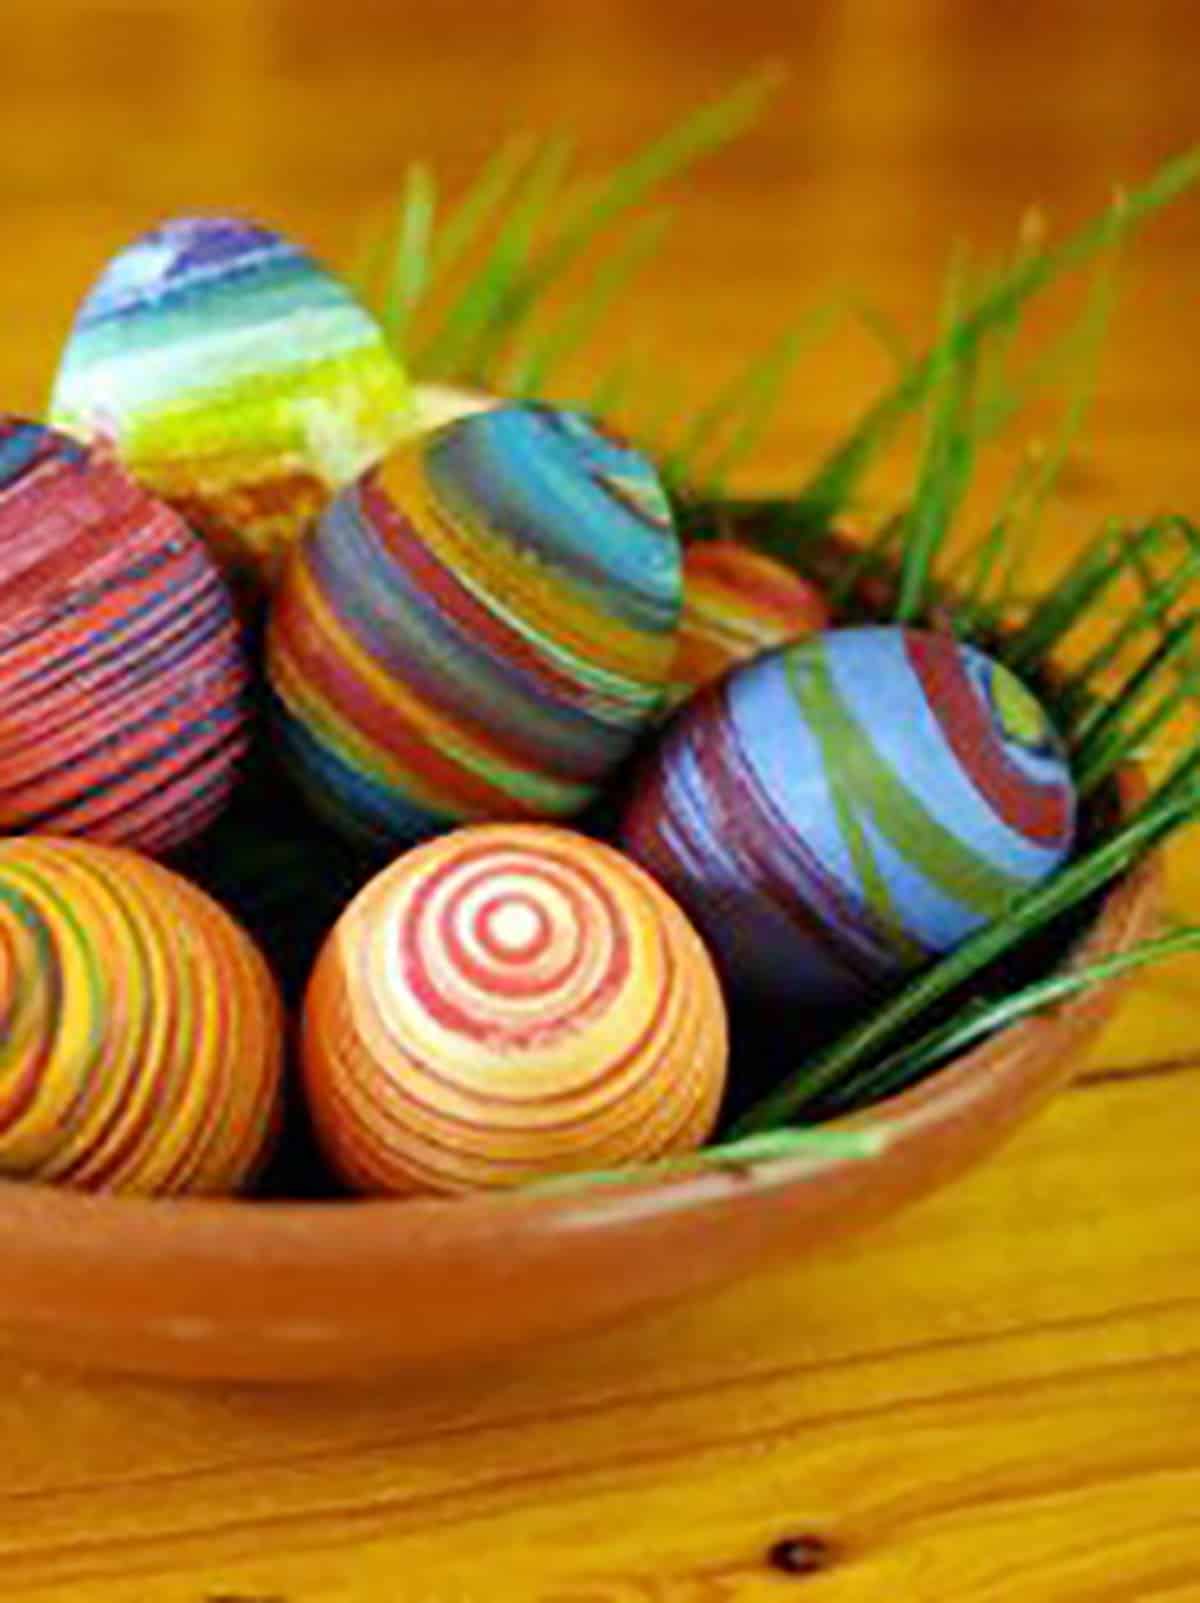 easter egg coloring techniques